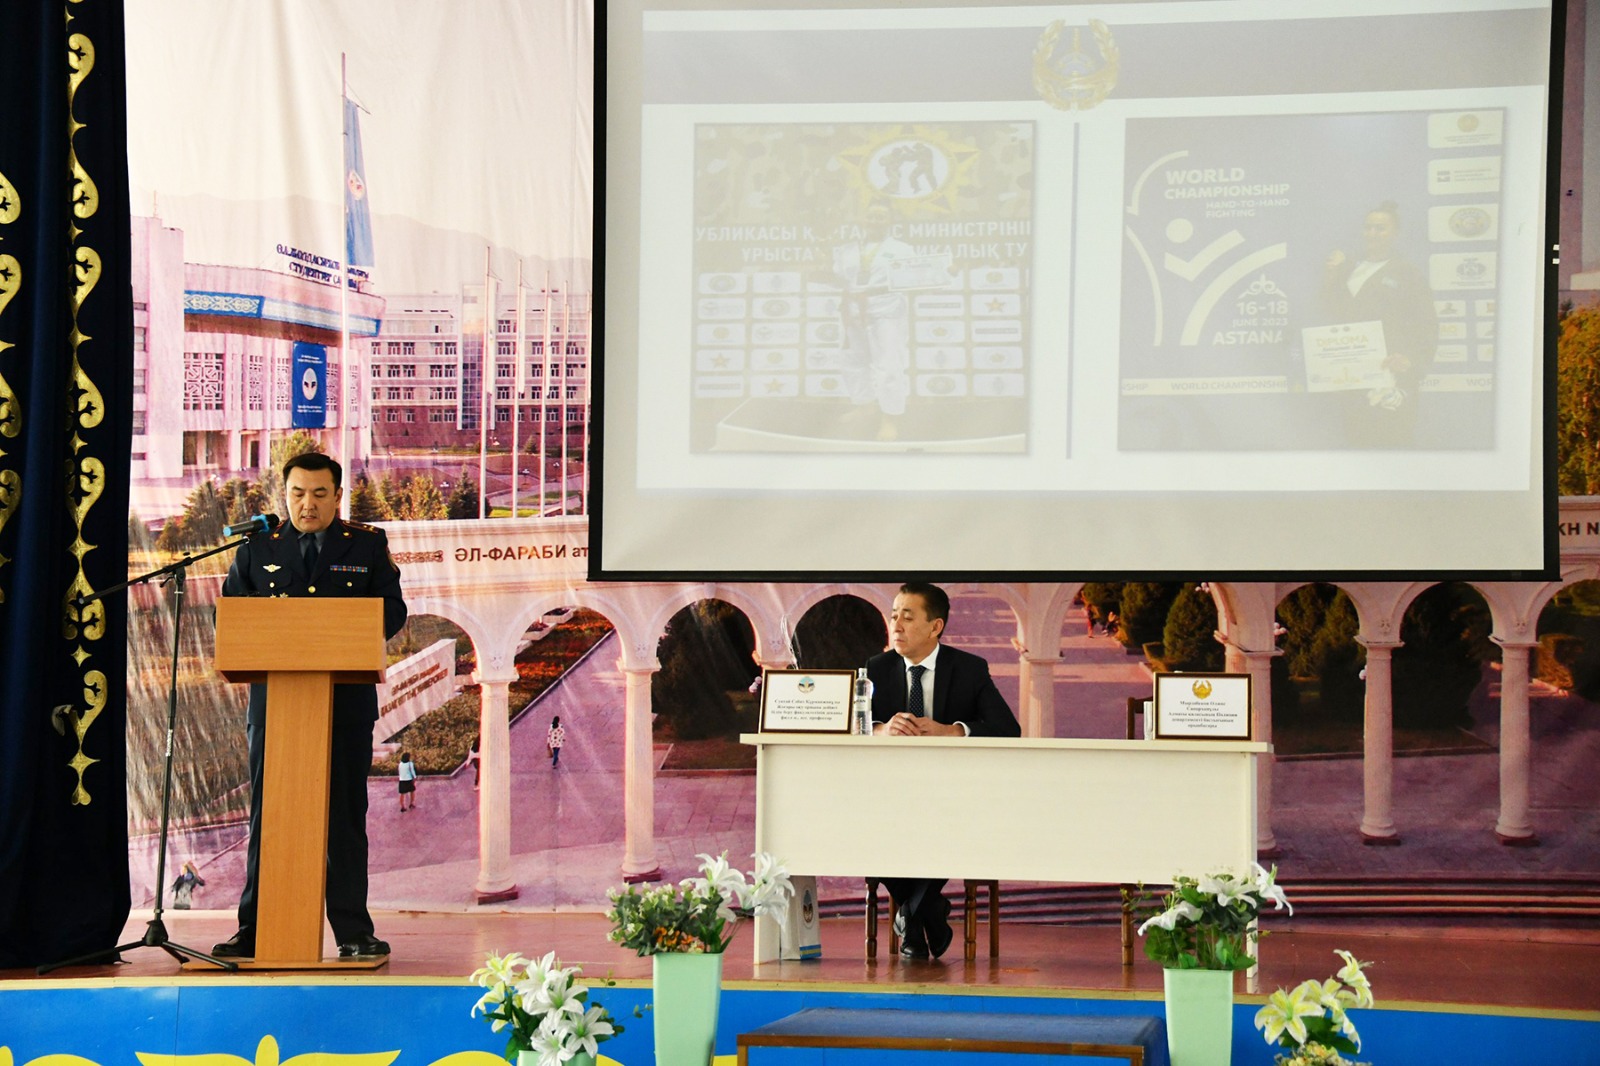 A lecture on legal literacy was held in KazNU